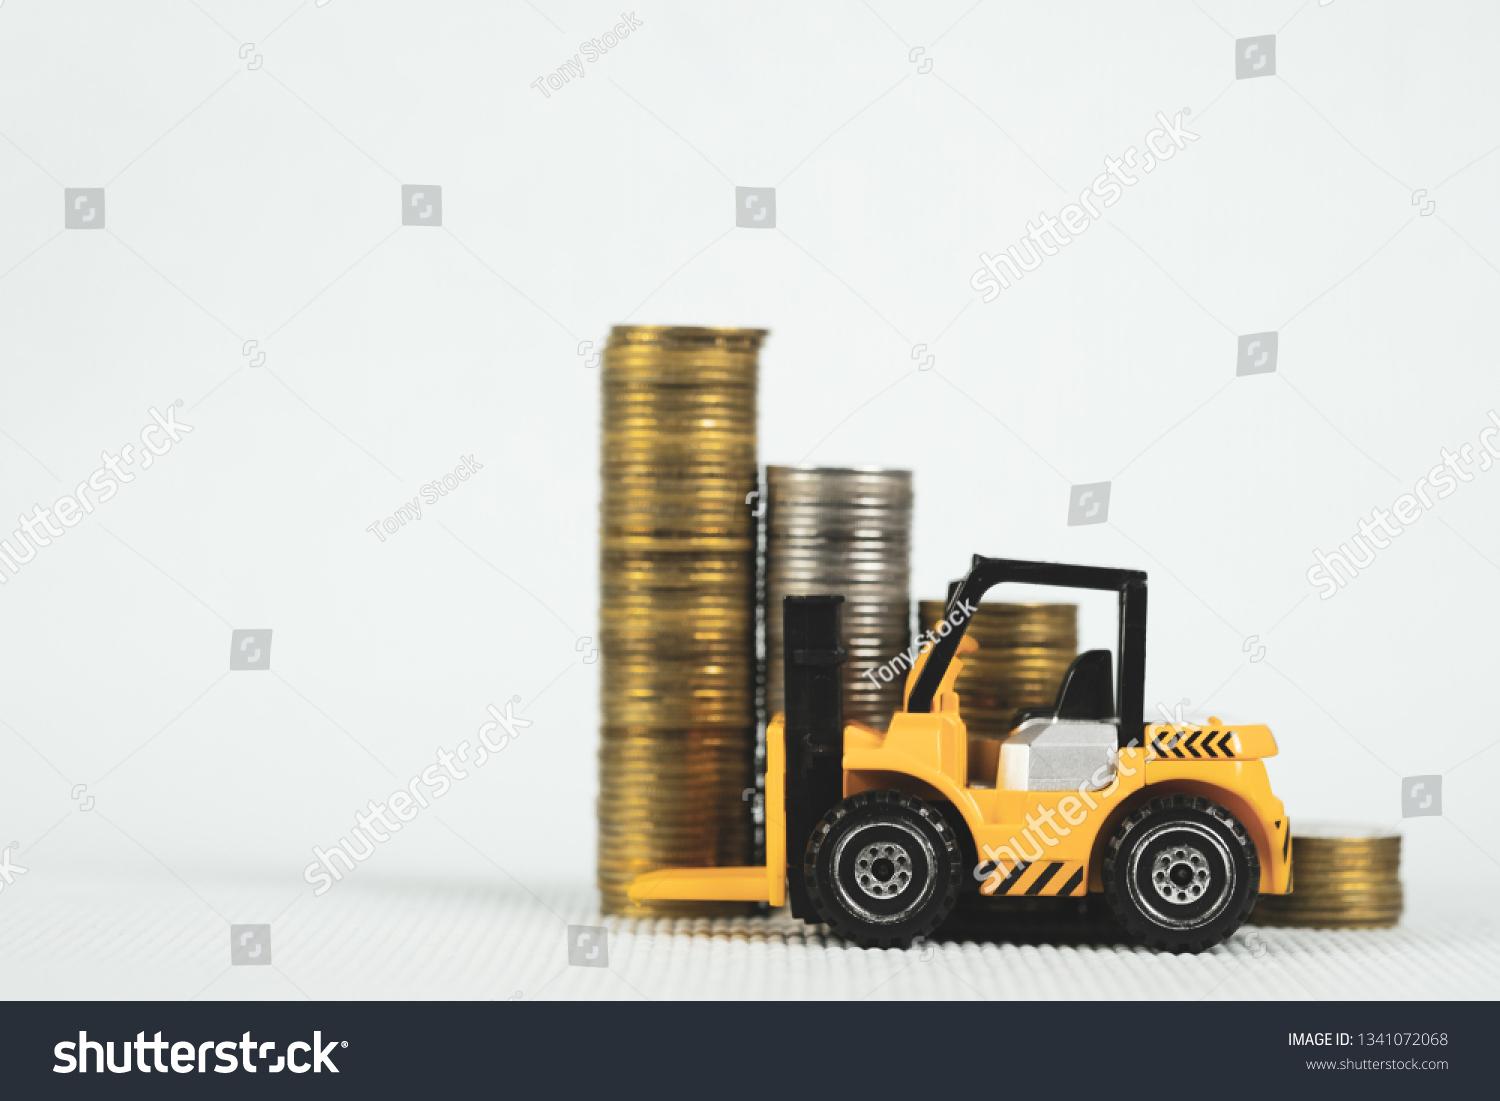 Mini Forklift Truck Coin Stack Business Business Finance Stock Image 1341072068